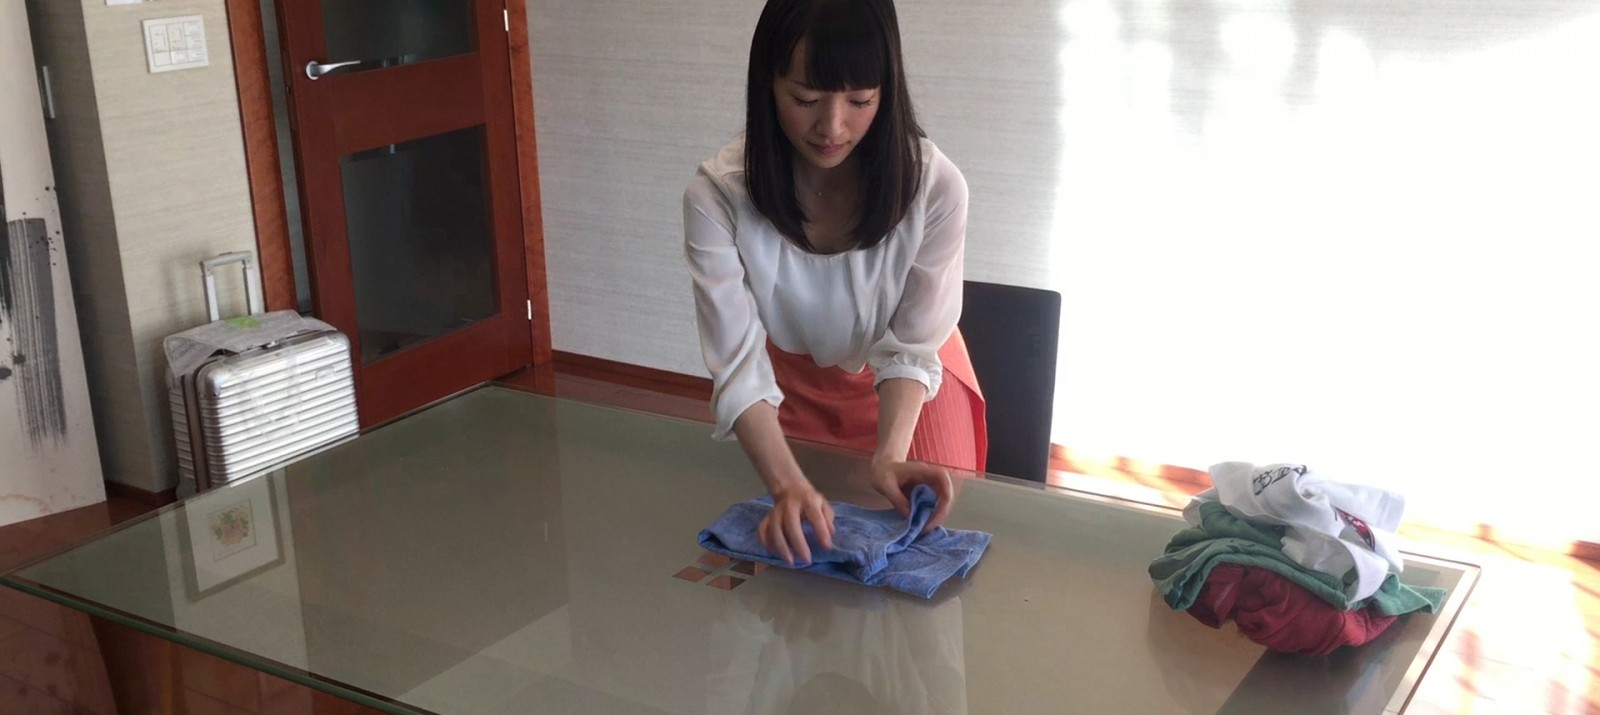 How To Fold A Shirt Origami Marie Kondo Shows You How To Fold And Store A Shirt